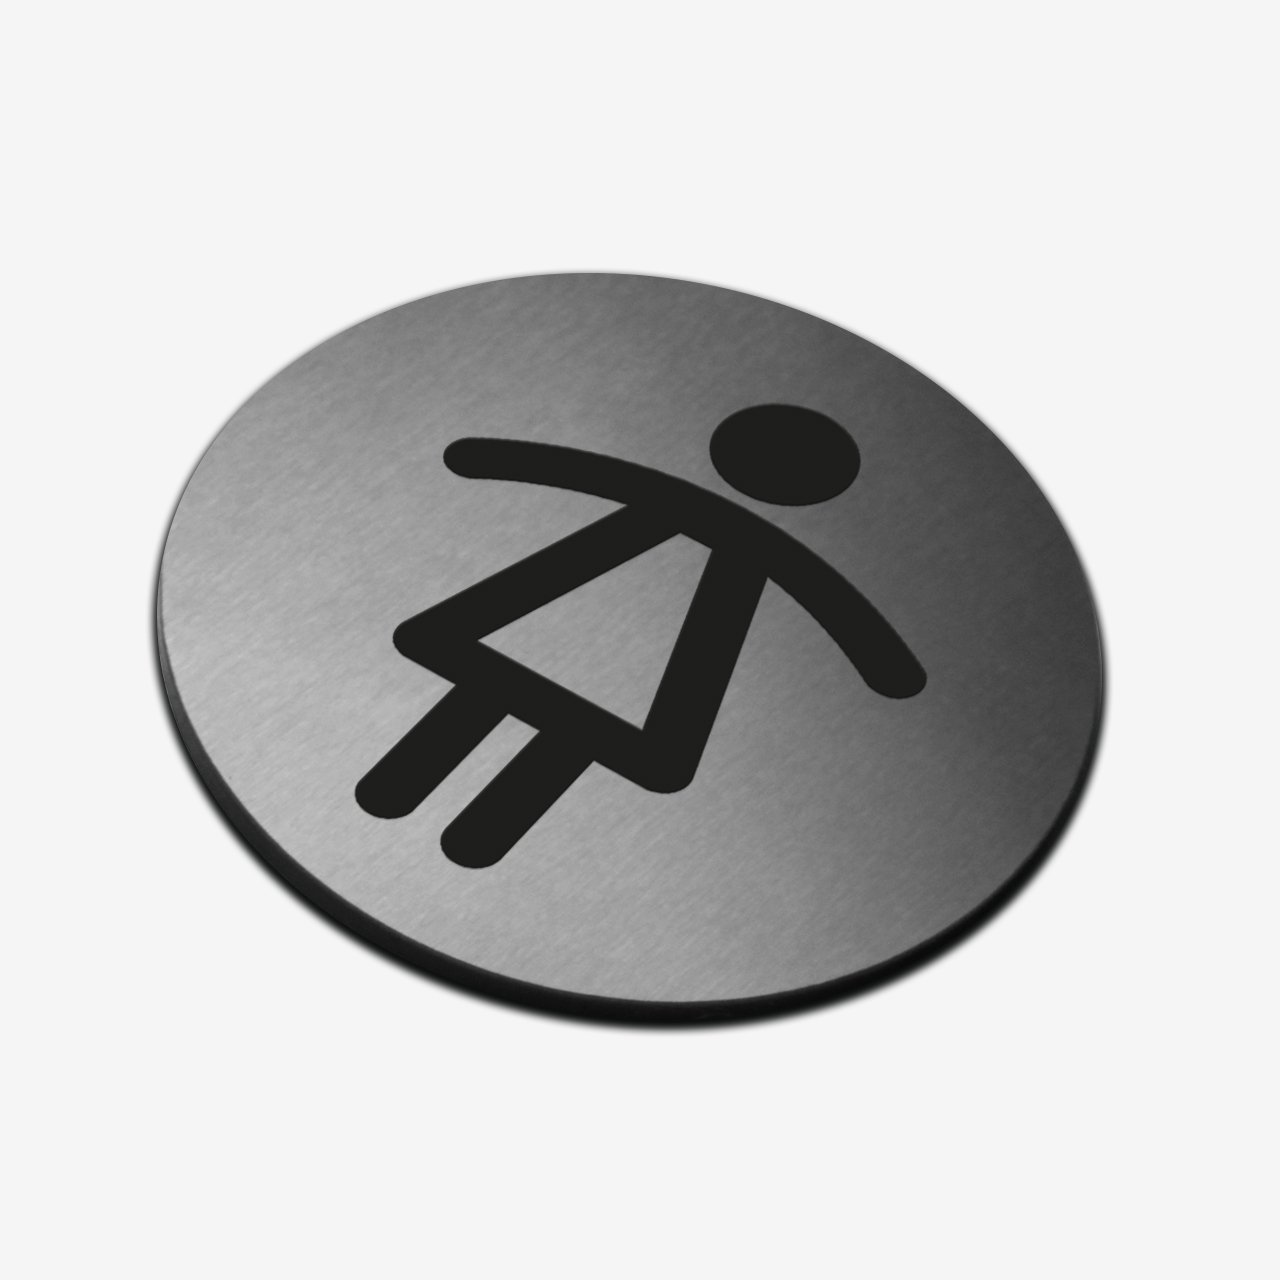 Women Toilet - Stainless Steel Sign Bathroom Signs circle Bsign